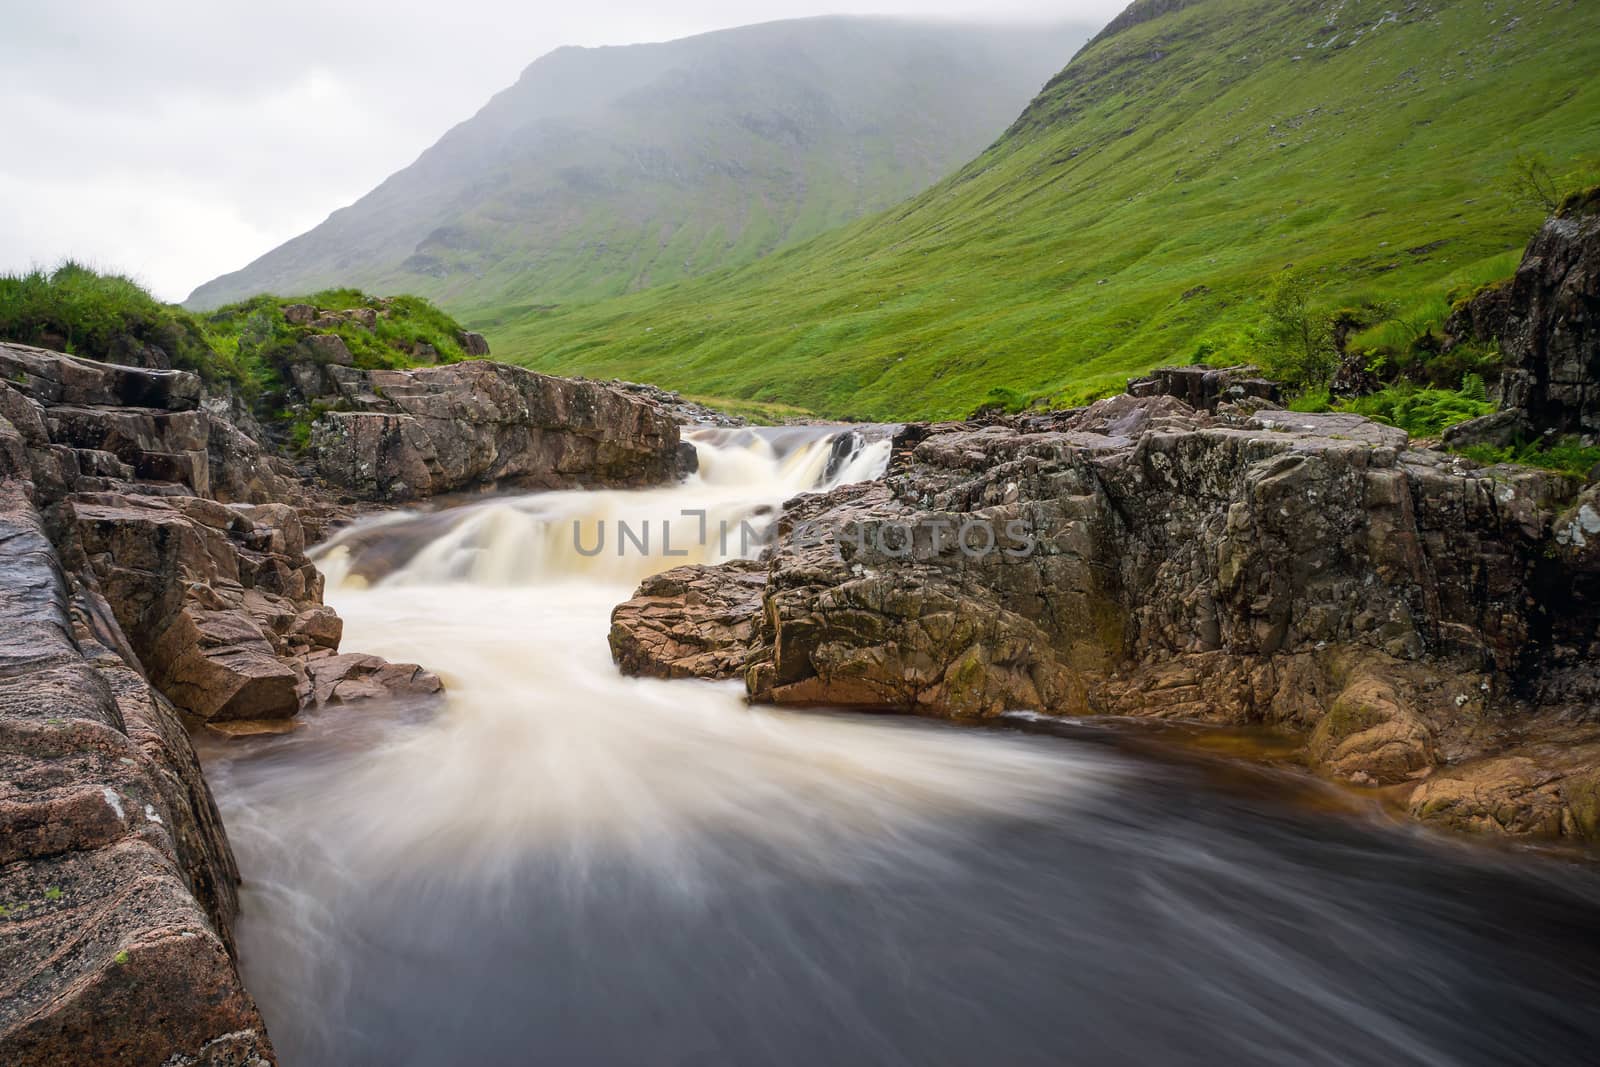 The river Etive in Glen Coe, Scotland, on a rainy day